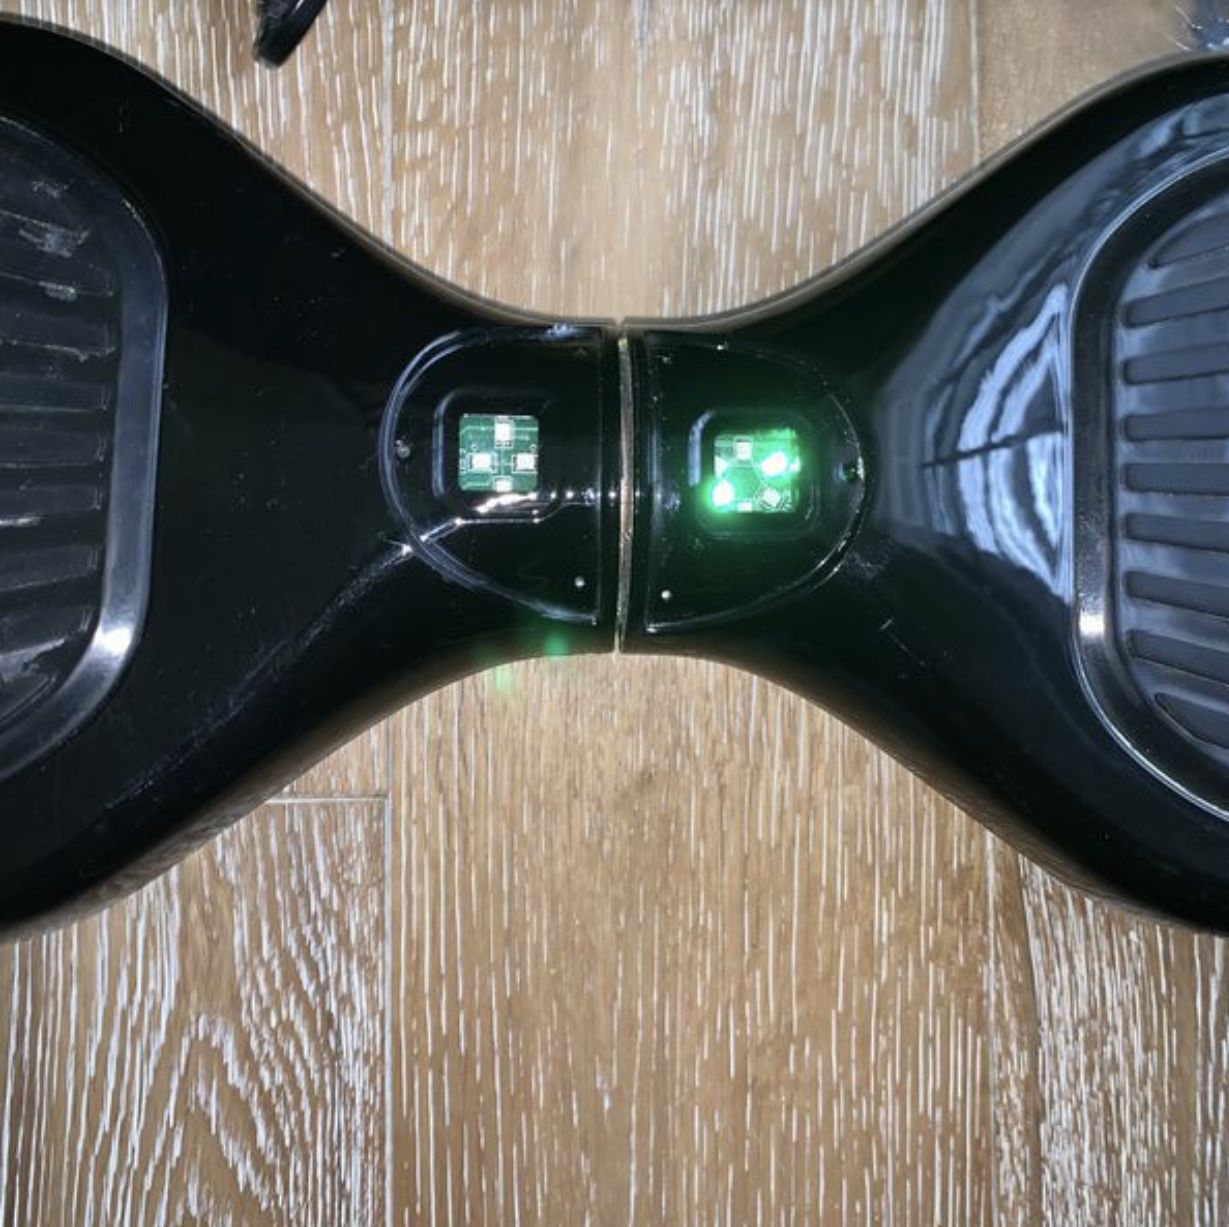 Black Hover Board ( I need gone today )